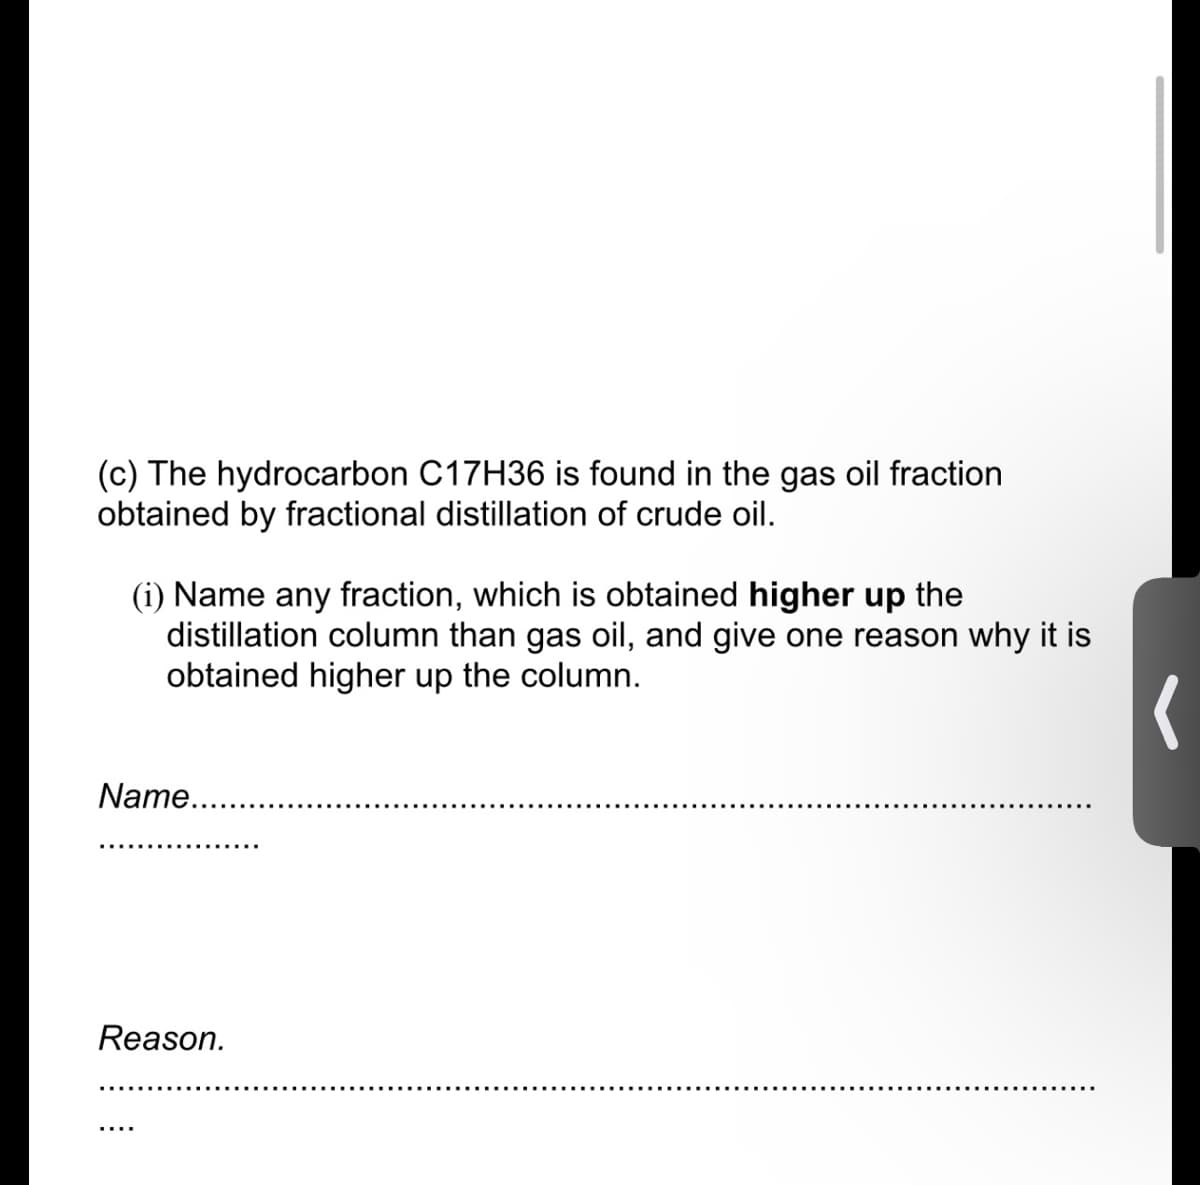 (c) The hydrocarbon C17H36 is found in the gas oil fraction
obtained by fractional distillation of crude oil.
(i) Name any fraction, which is obtained higher up the
distillation column than gas oil, and give one reason why it is
obtained higher up the column.
Name..
Reason.
